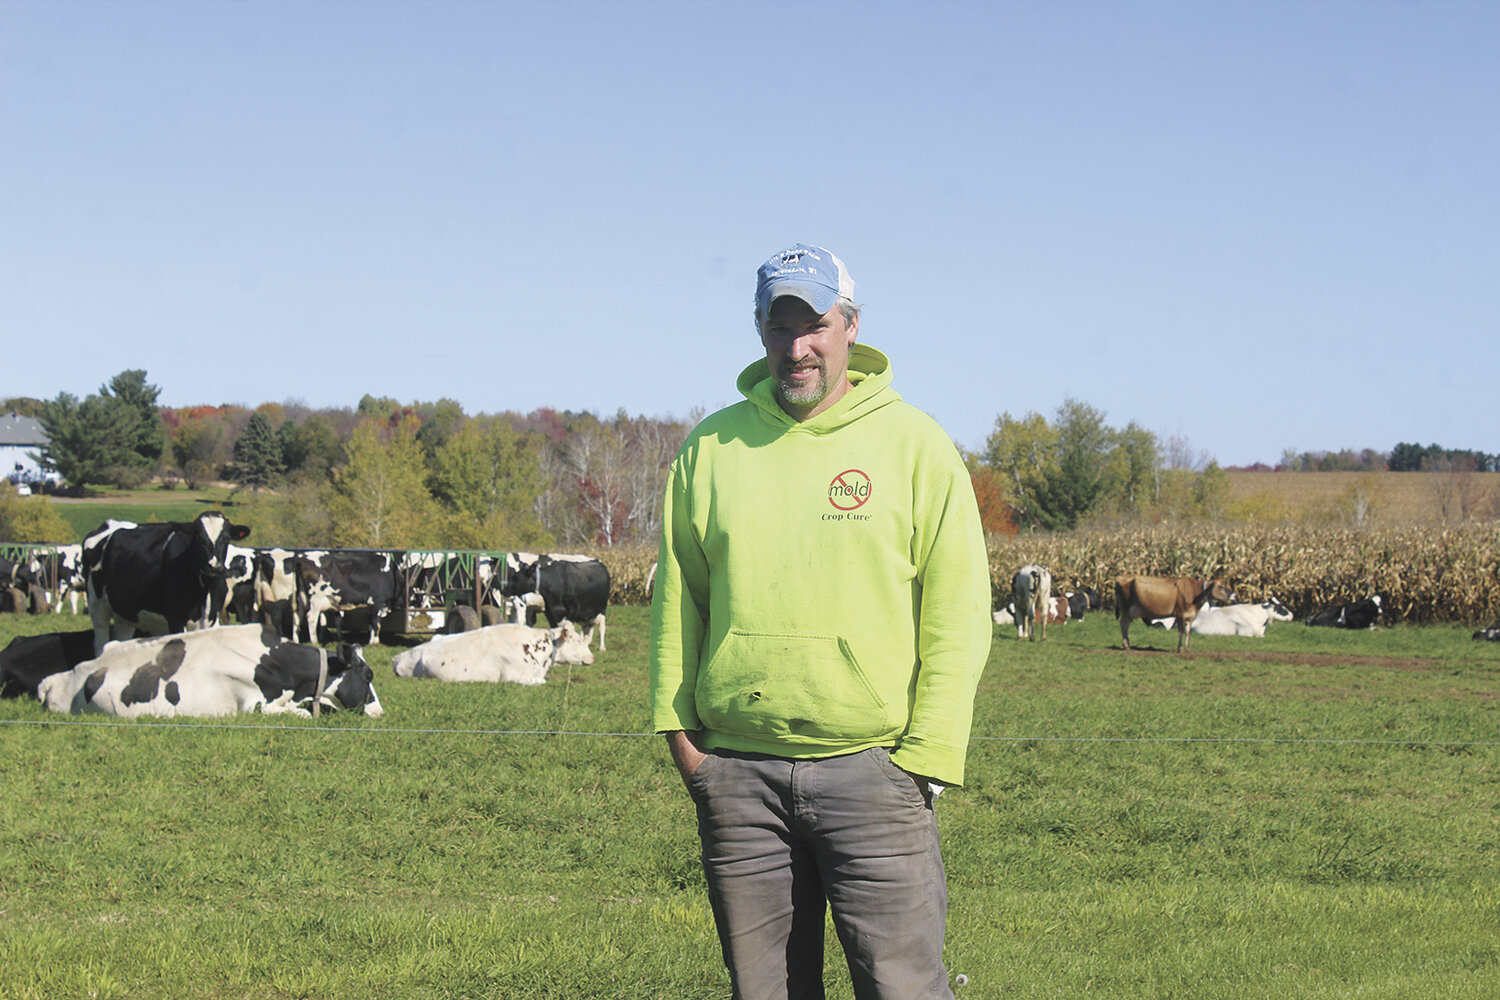 Steve Becker stands by his cows Oct. 16 on his dairy farm near Auburndale, Wisconsin. Becker broke his leg last fall on the morning he planned to take a day to attend World Dairy Expo in Madison, Wisconsin.